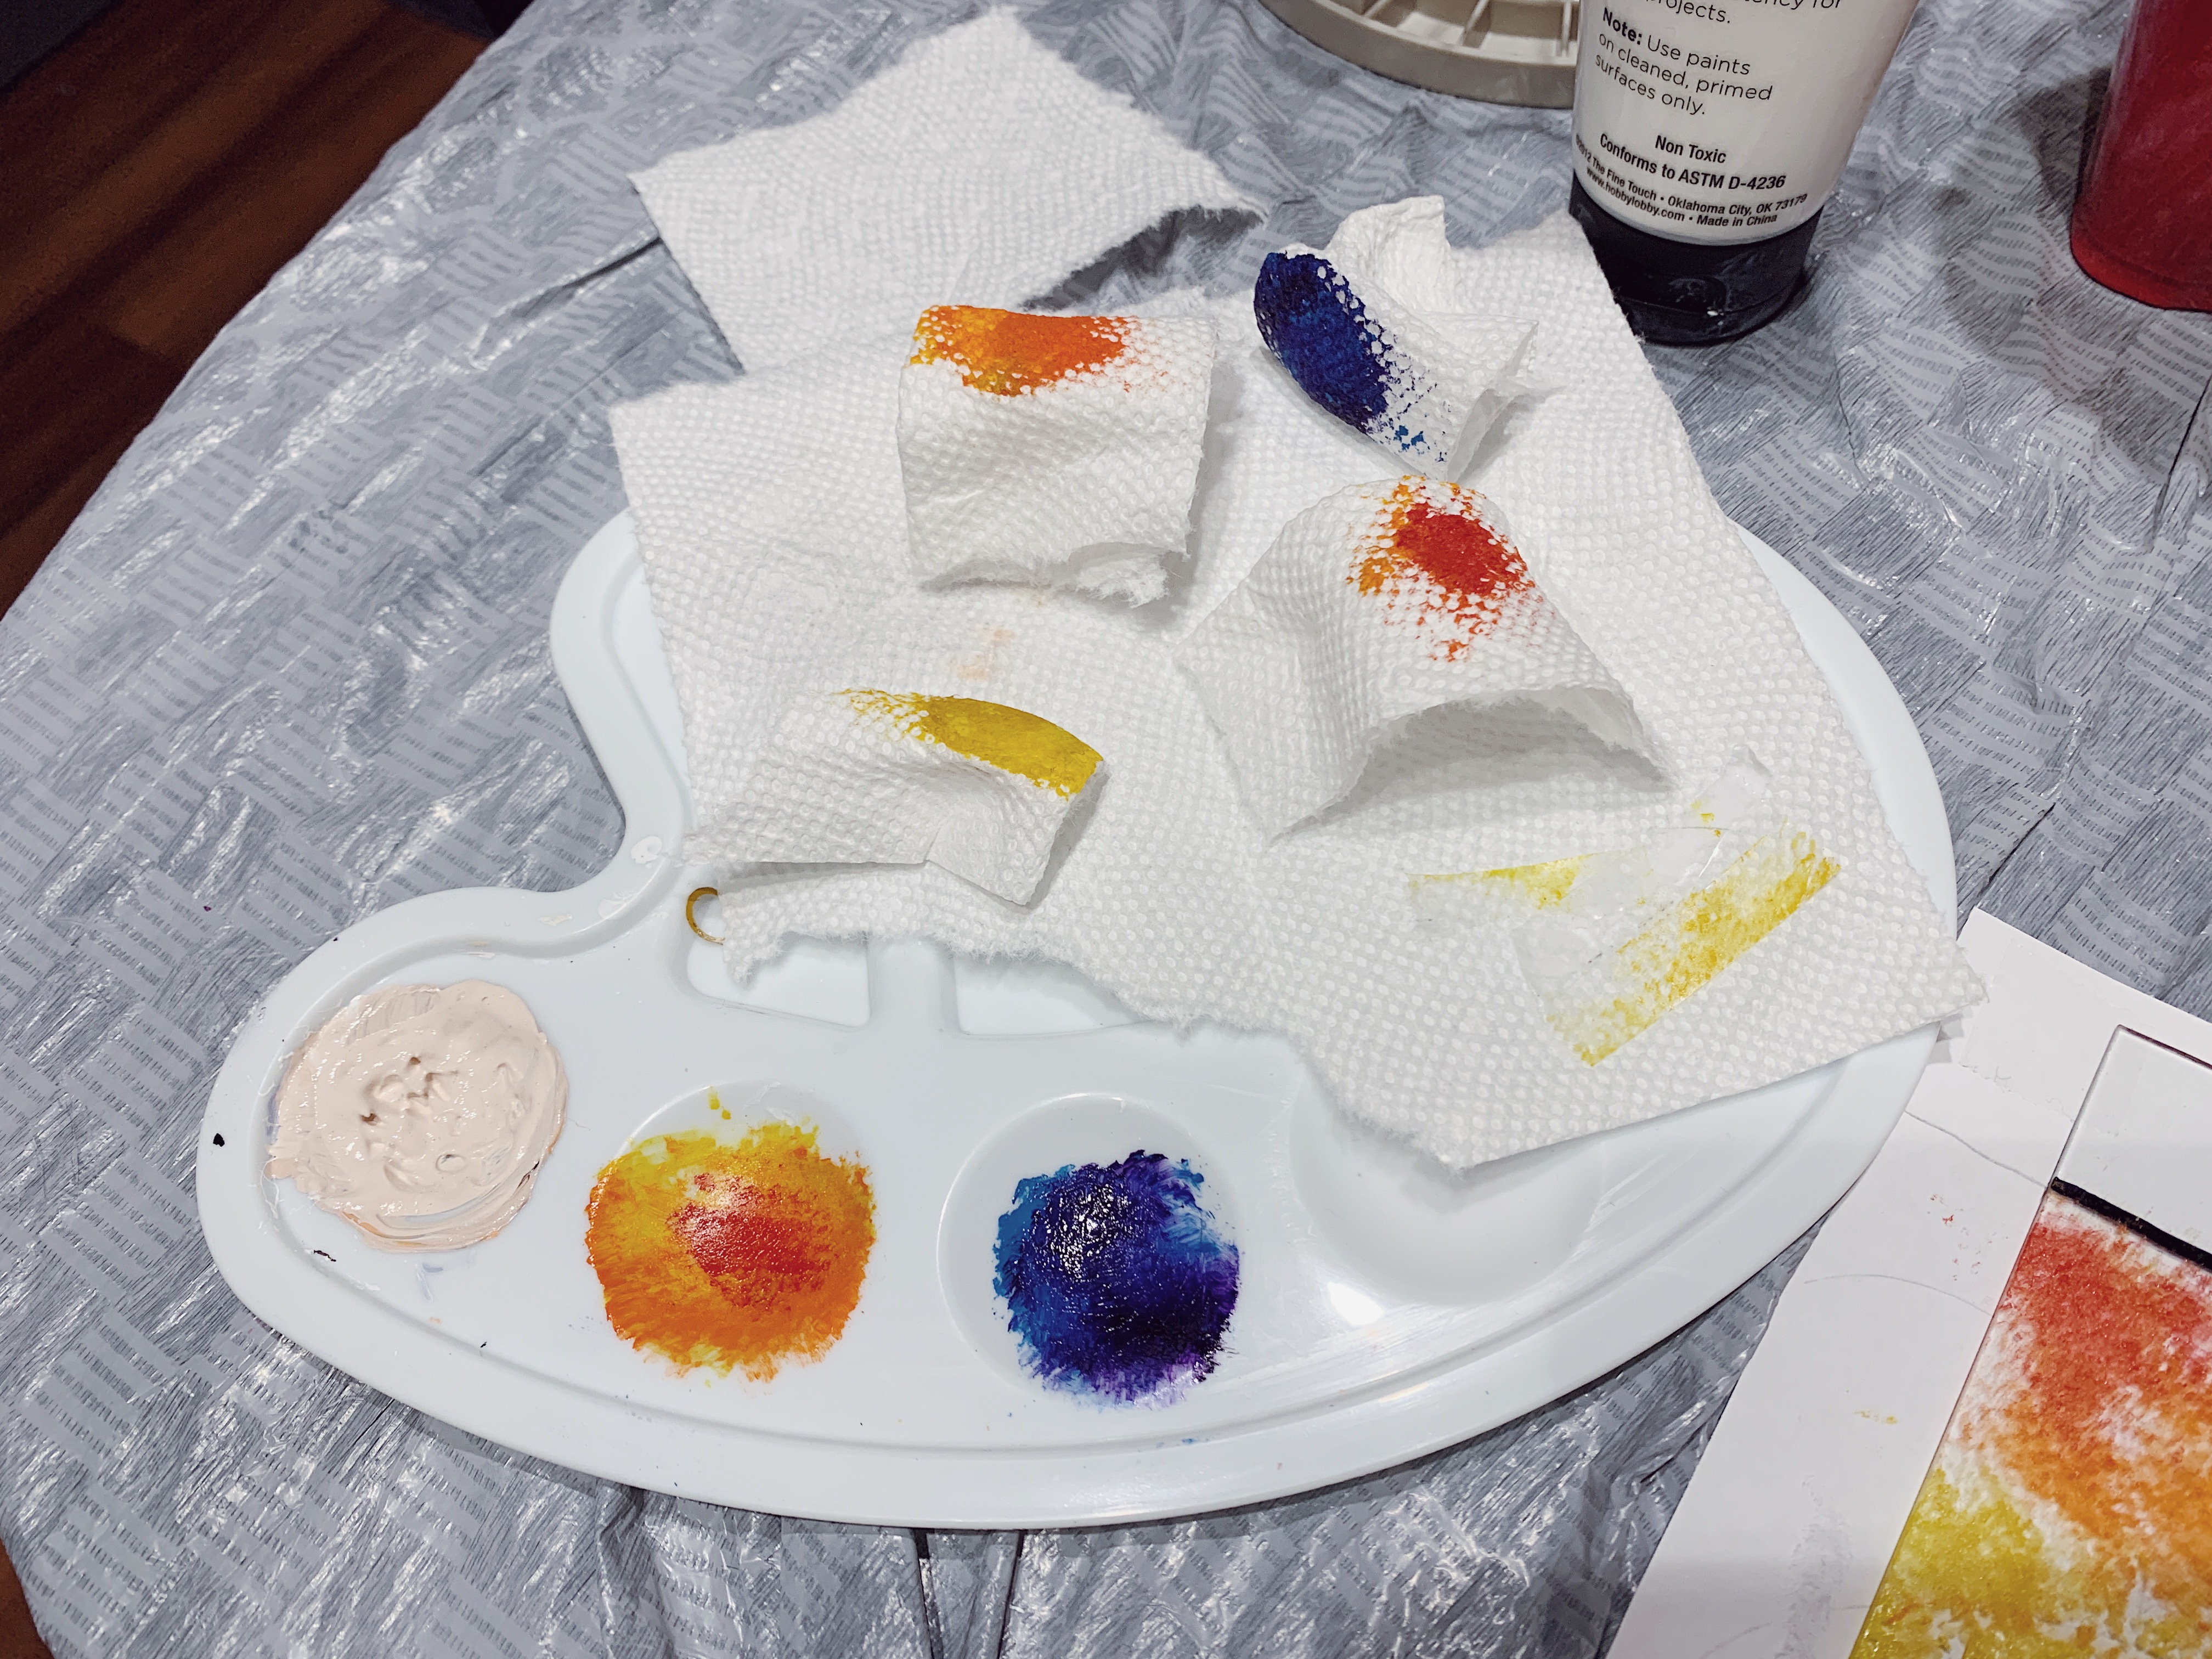 A photo of a paint palette with dabbed paper towels